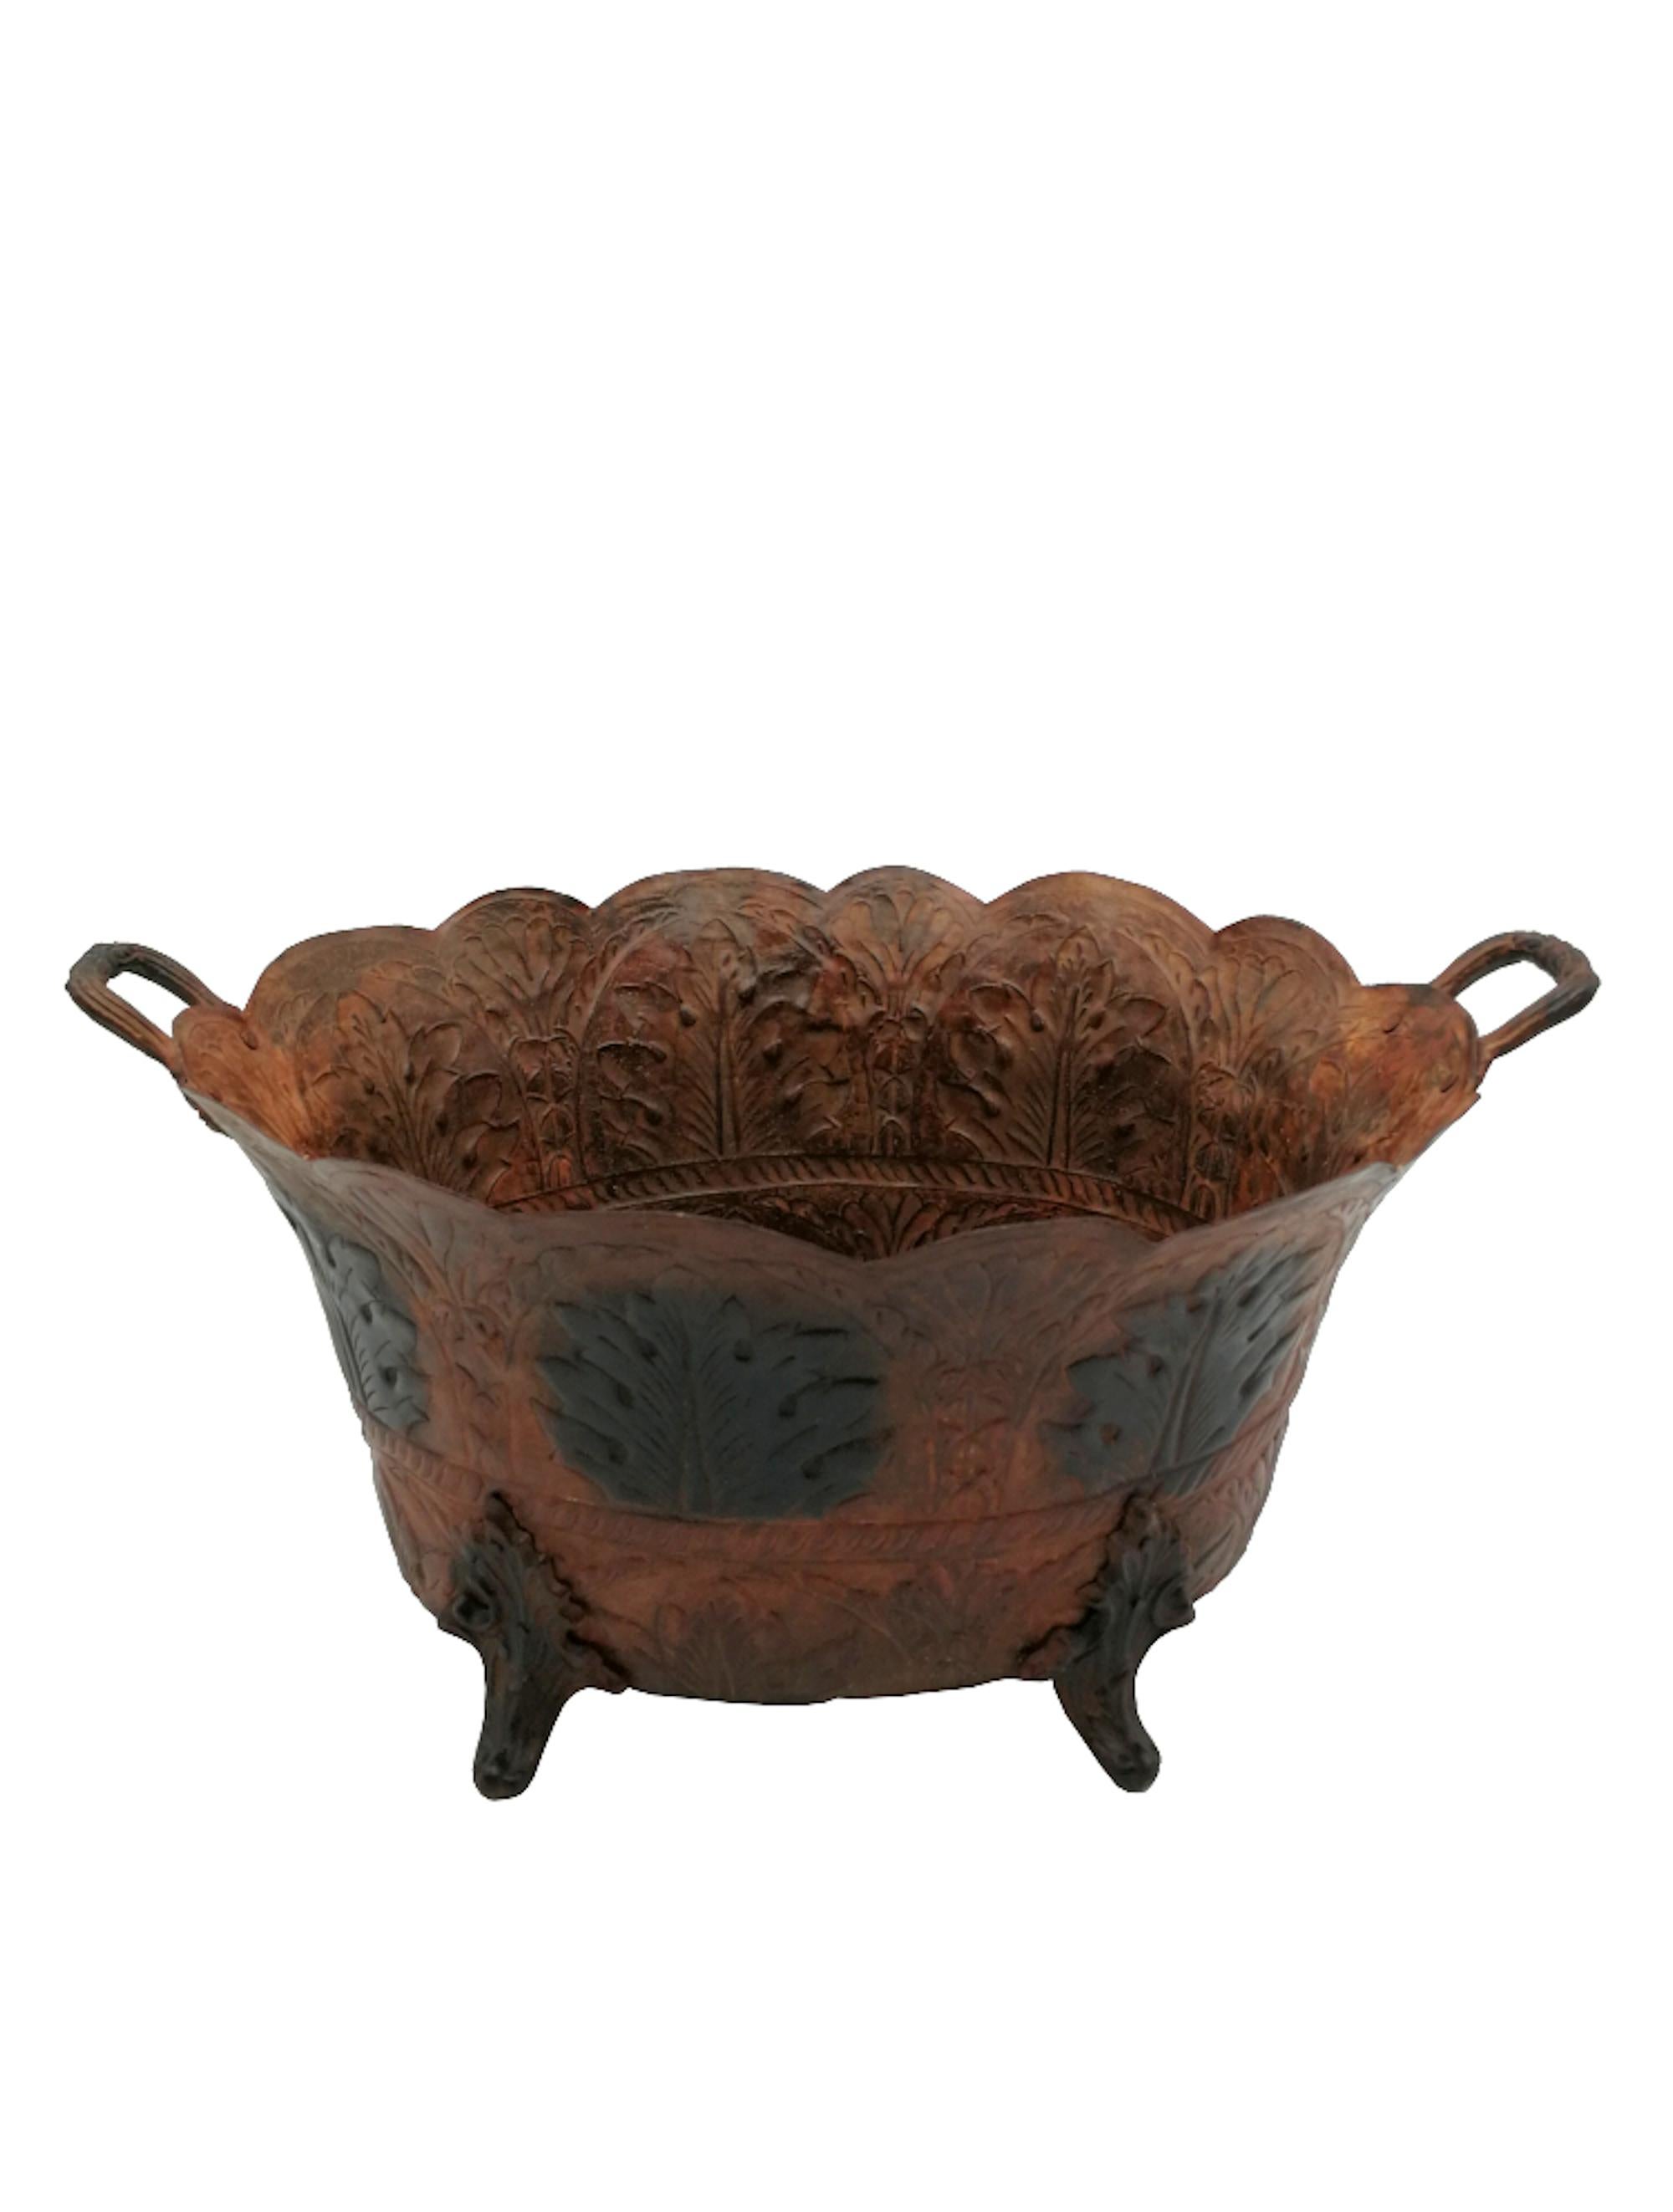 Art Nouveau brown painted tole planter with hand embossed acanthus leaves decoration standing
on 4 feet shaped as acanthus leaves and 2 handles with fruit decoration. The tole is painted in 2
different tones of brown. High quality embossing with